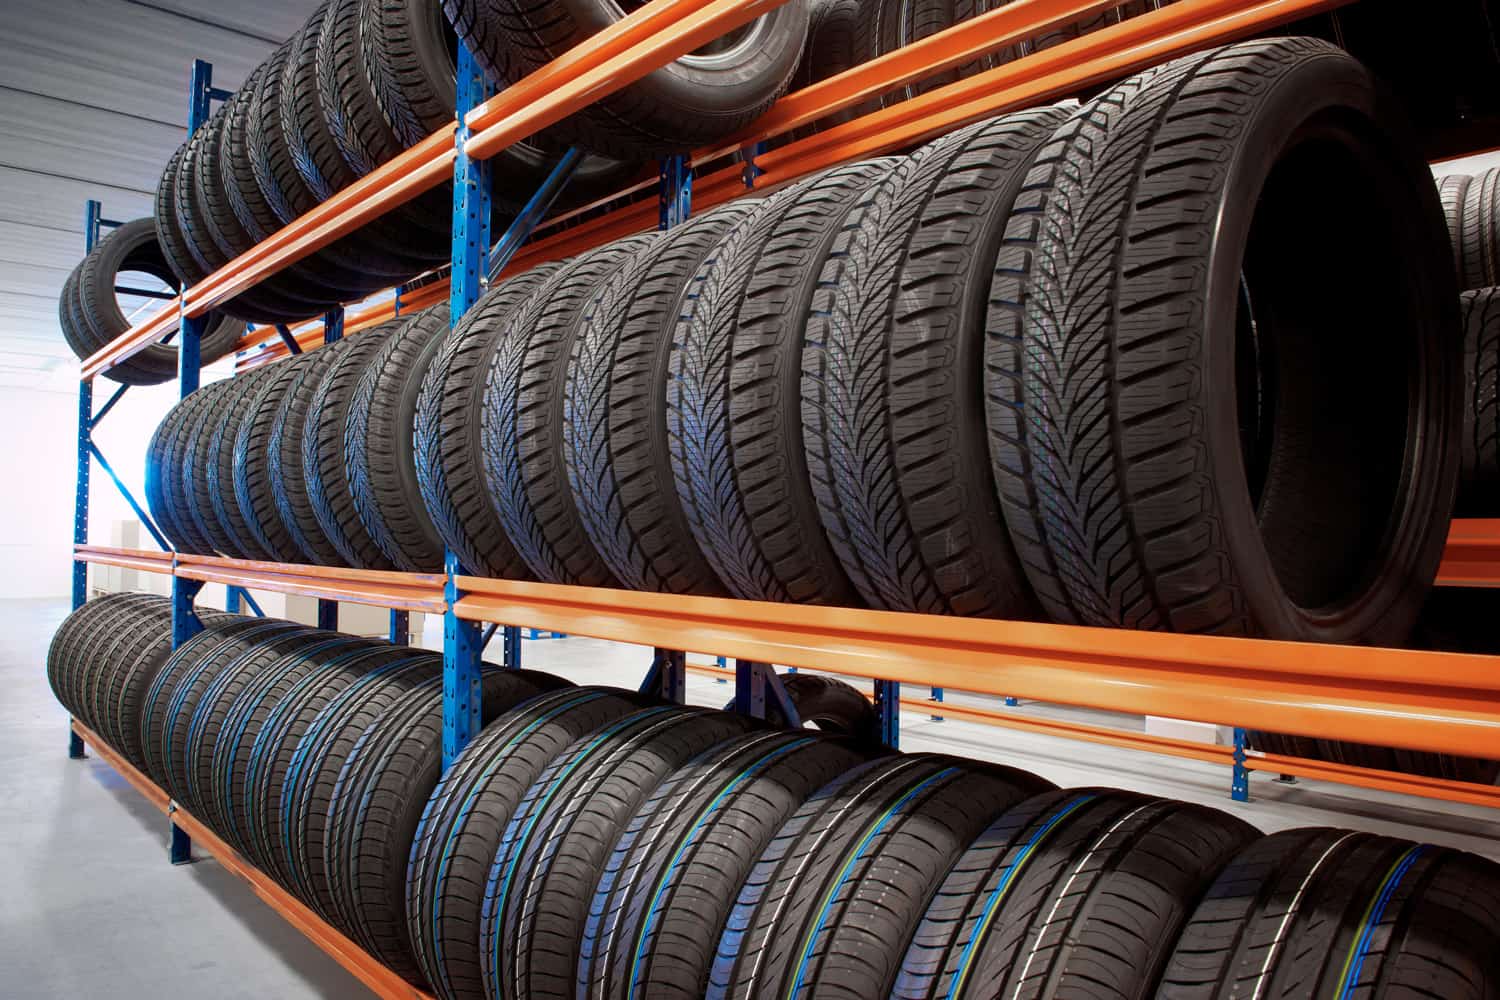 warehouse storing car tyres in rows for sale